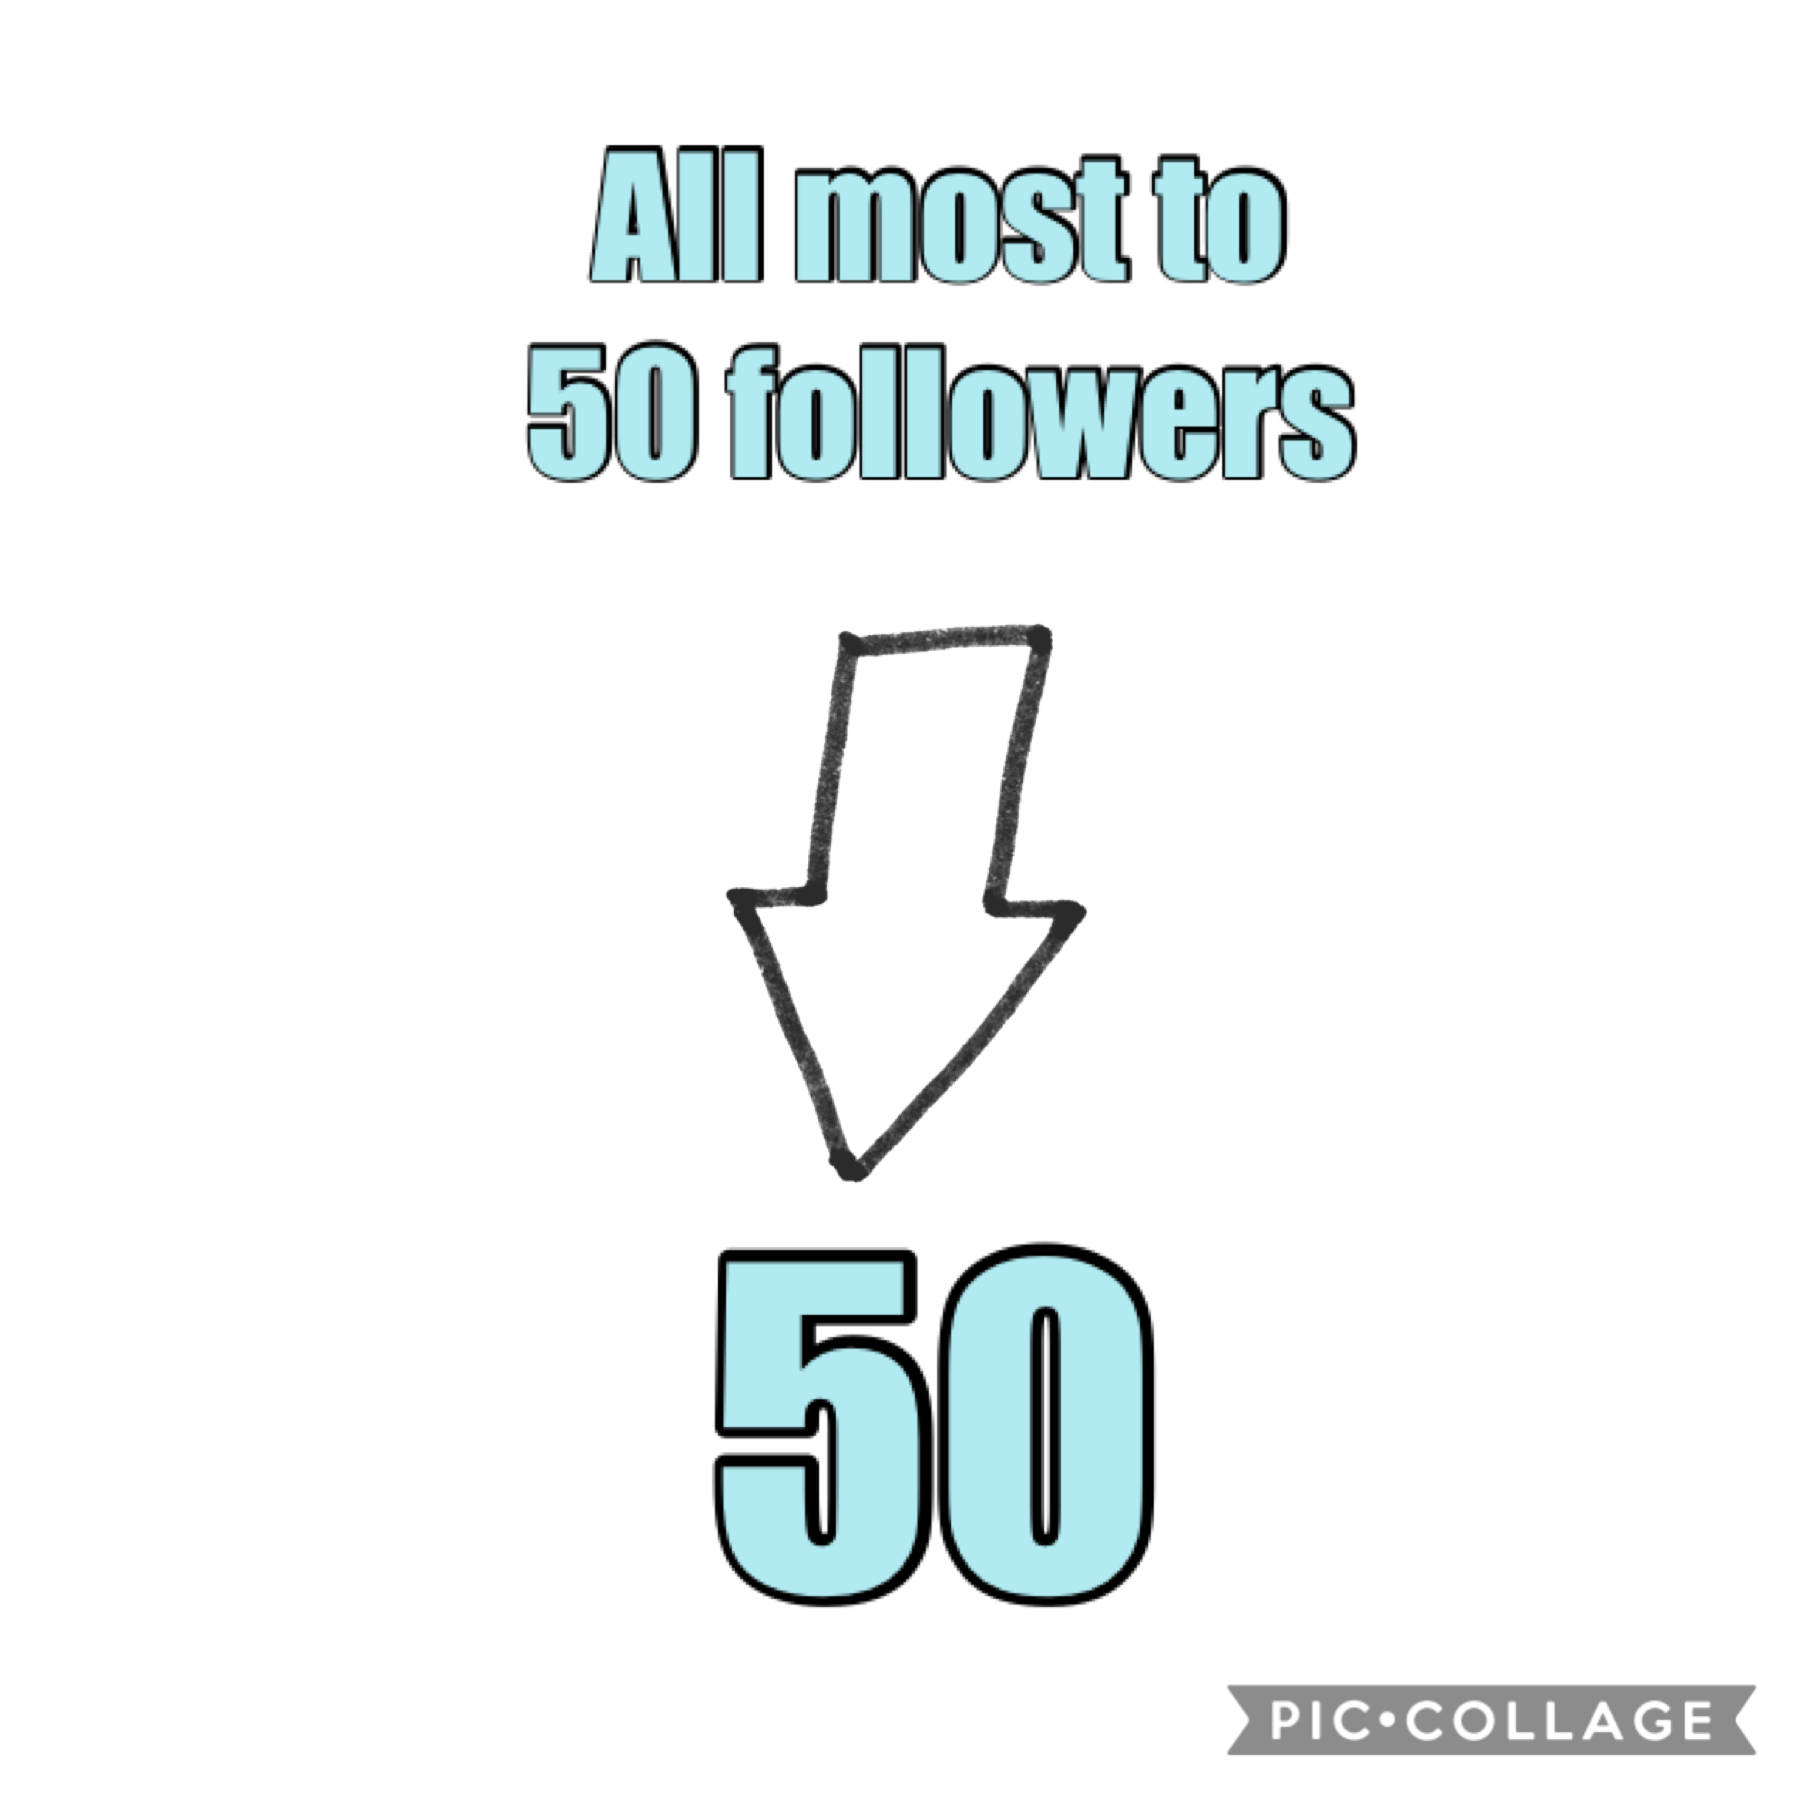 Help me get to 50 